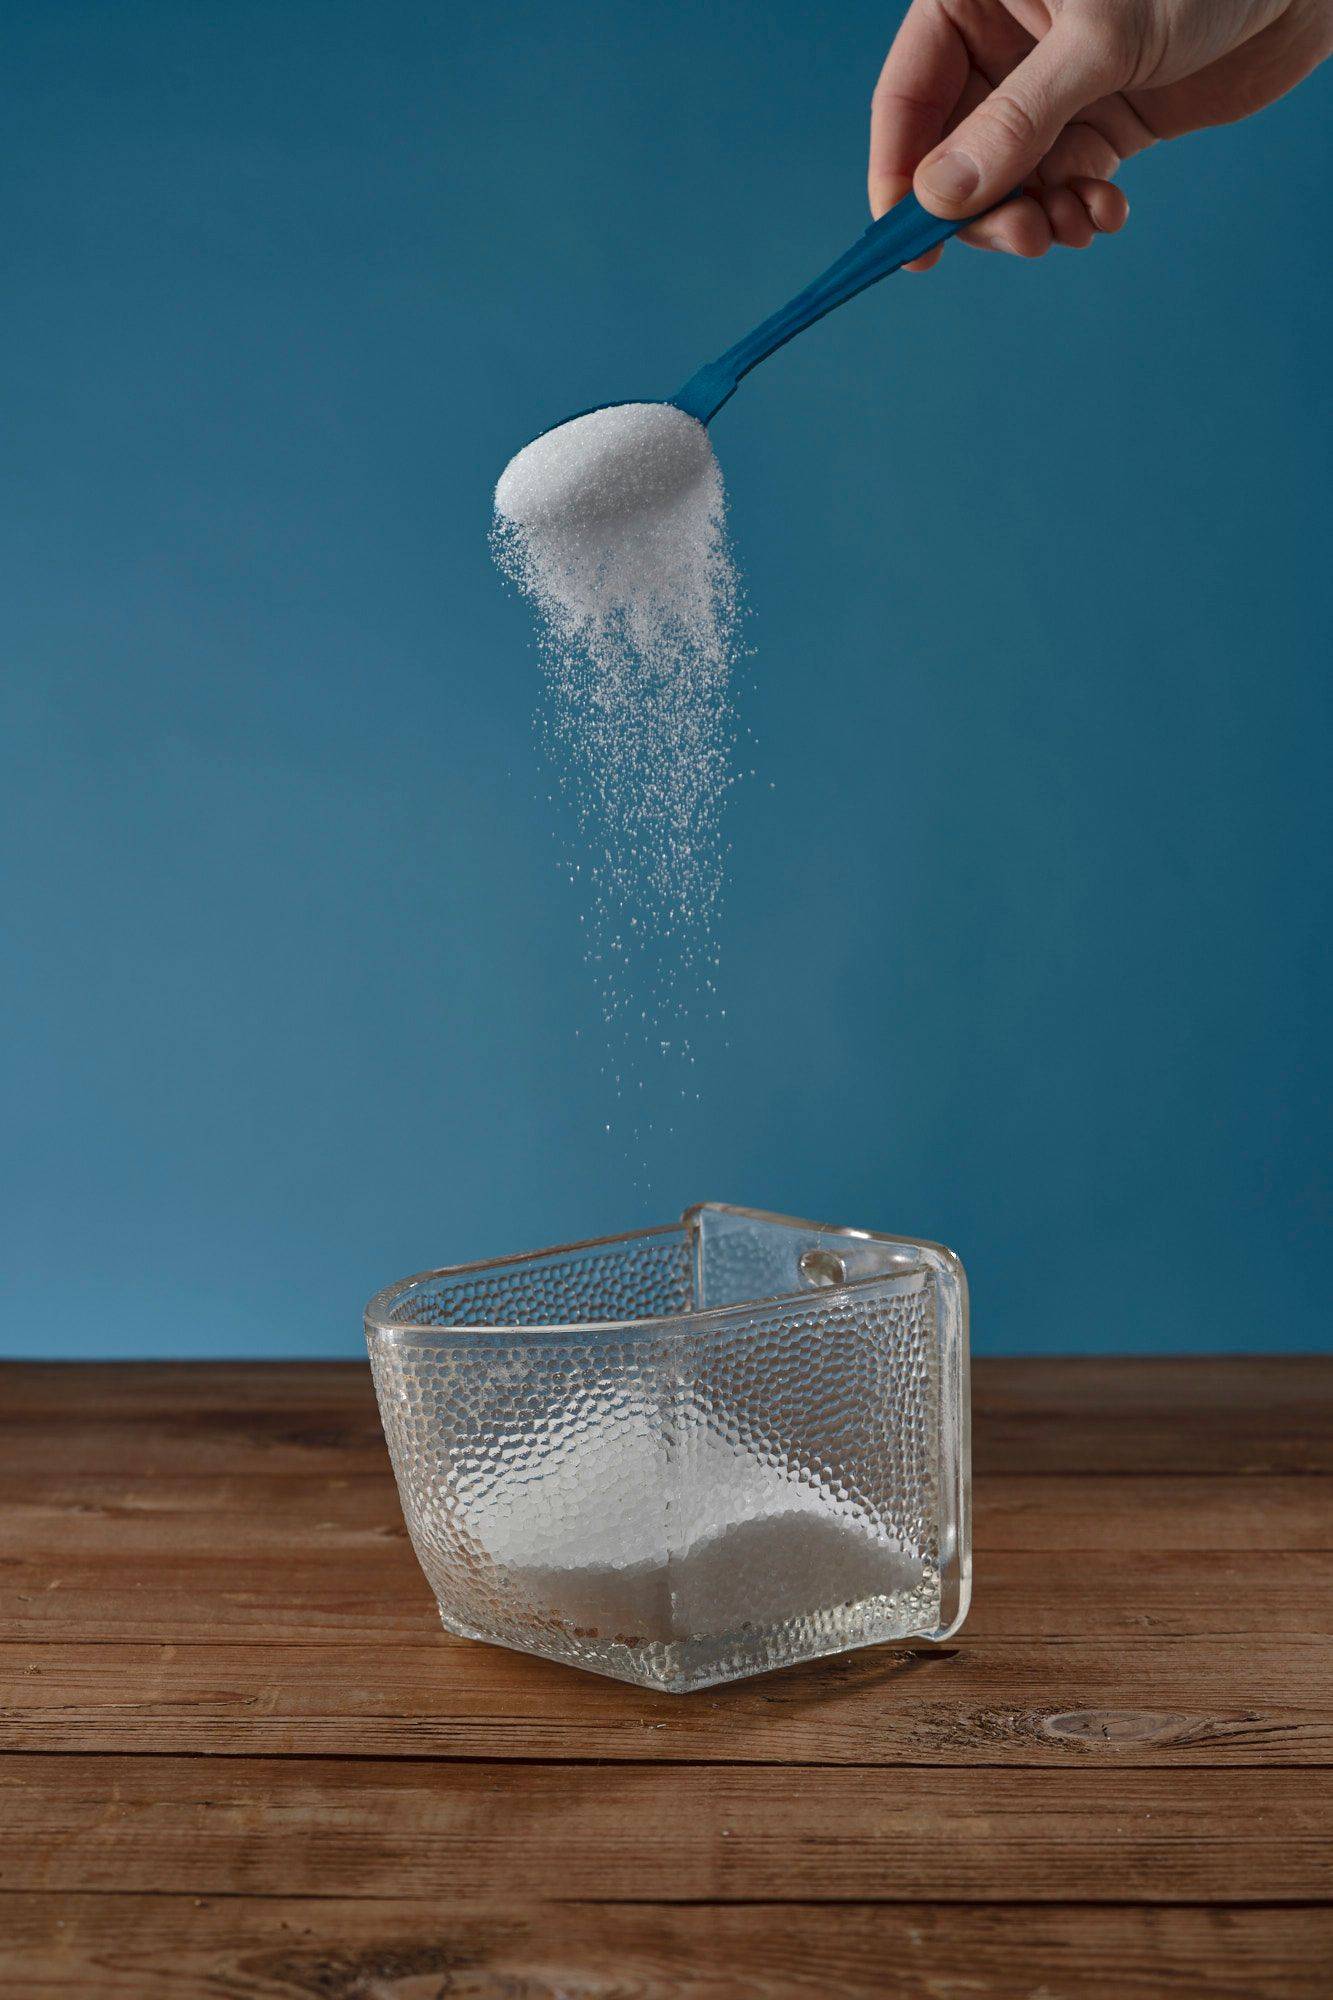 sugar in a vintage jar on a wooden table with blue background